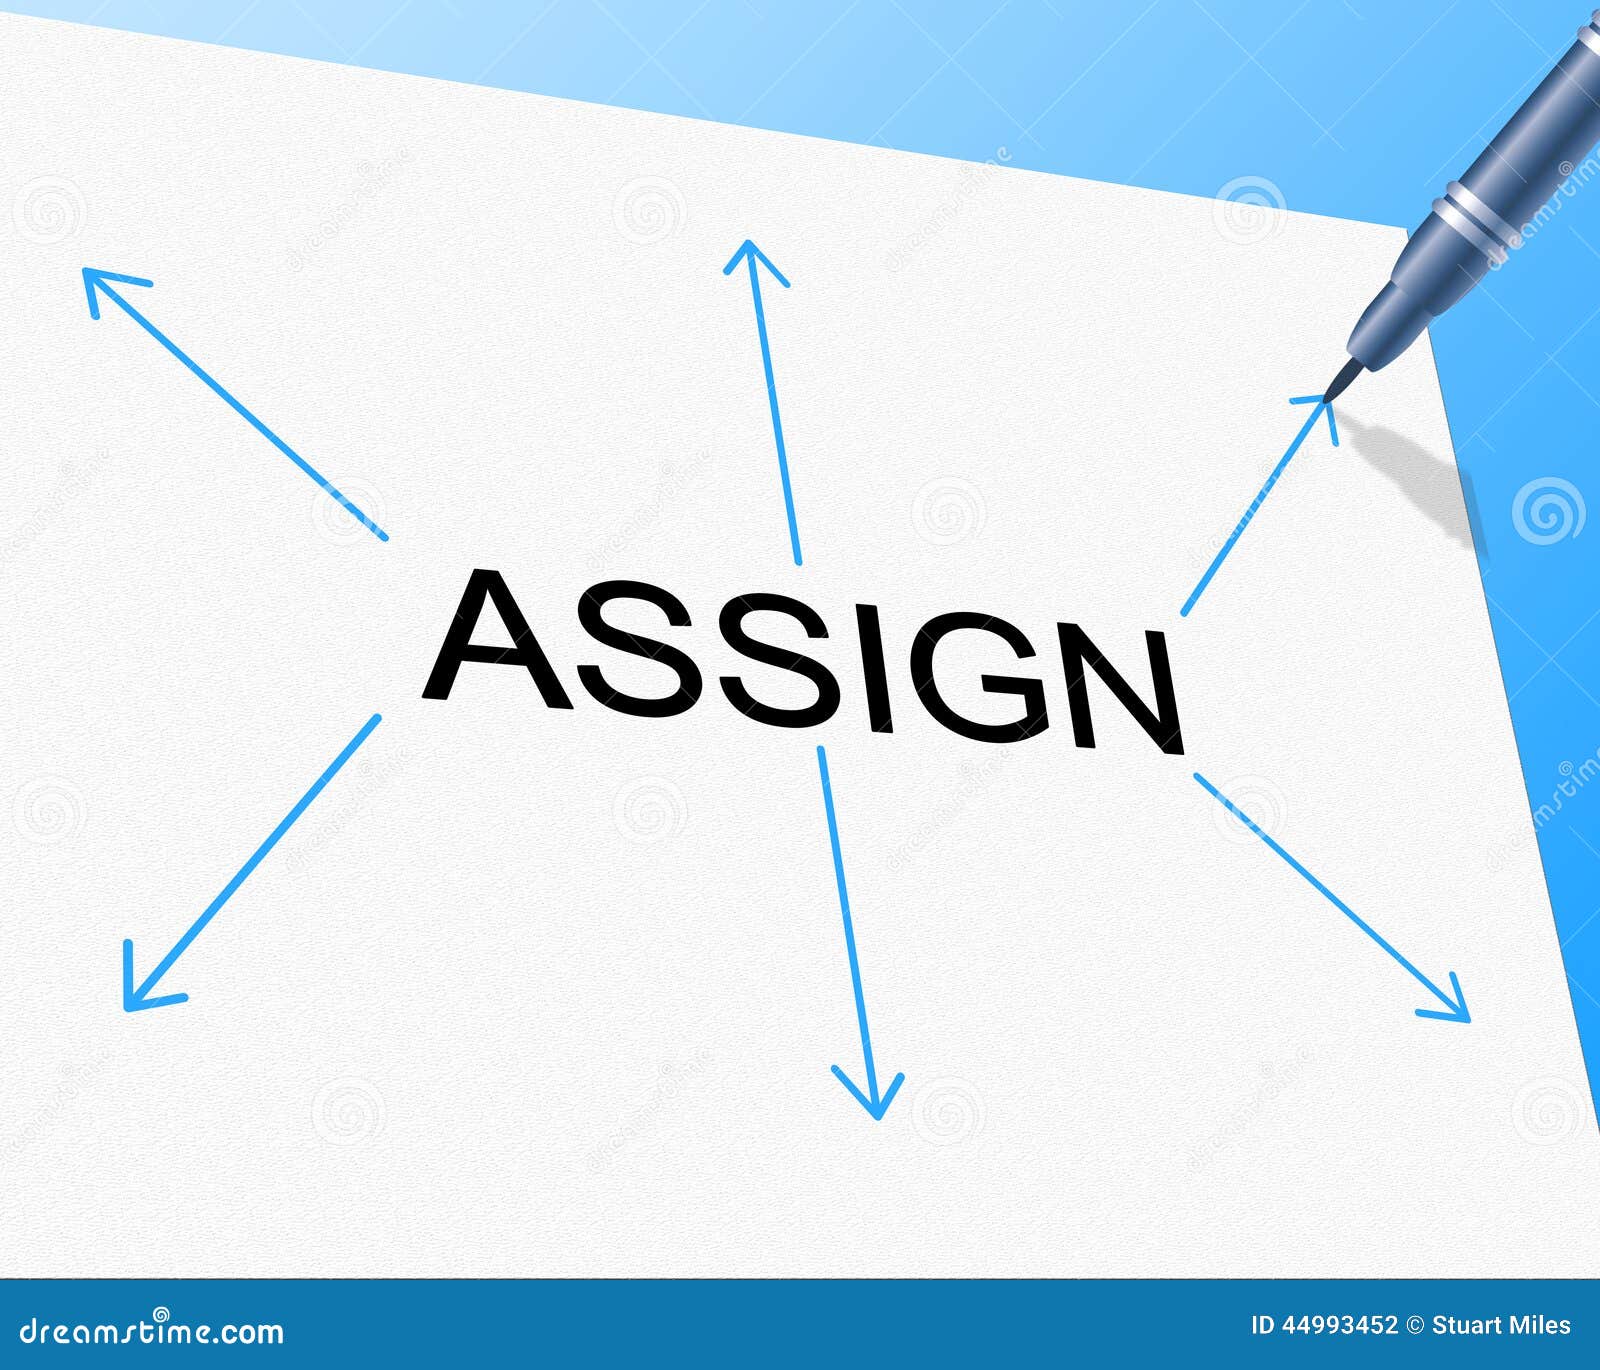 assign to be assigned